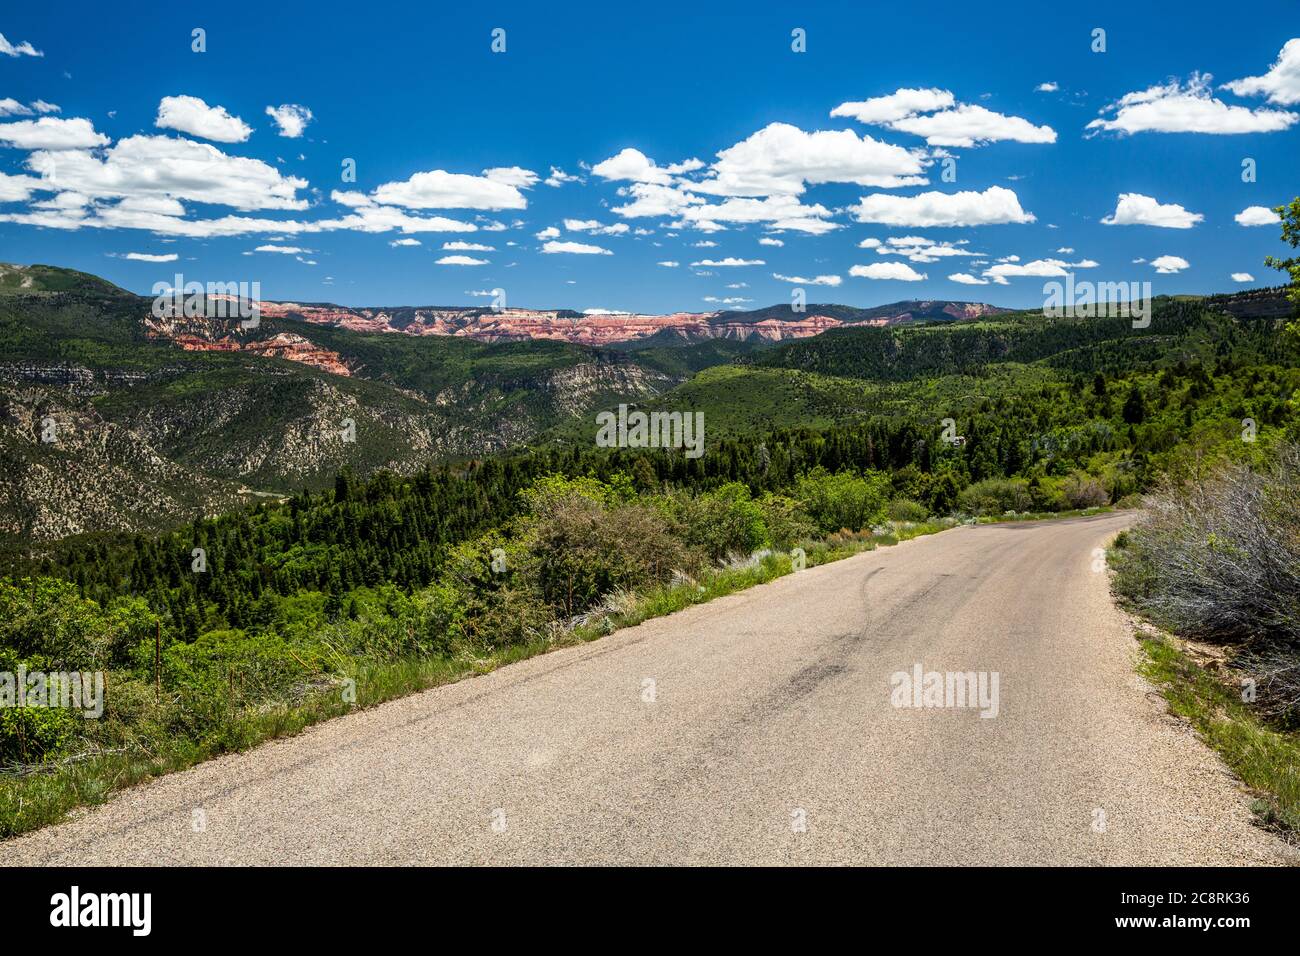 Small road leading through green hills to the red rock cliffs of Cedar Breaks National Monument in Southern Utah. Stock Photo